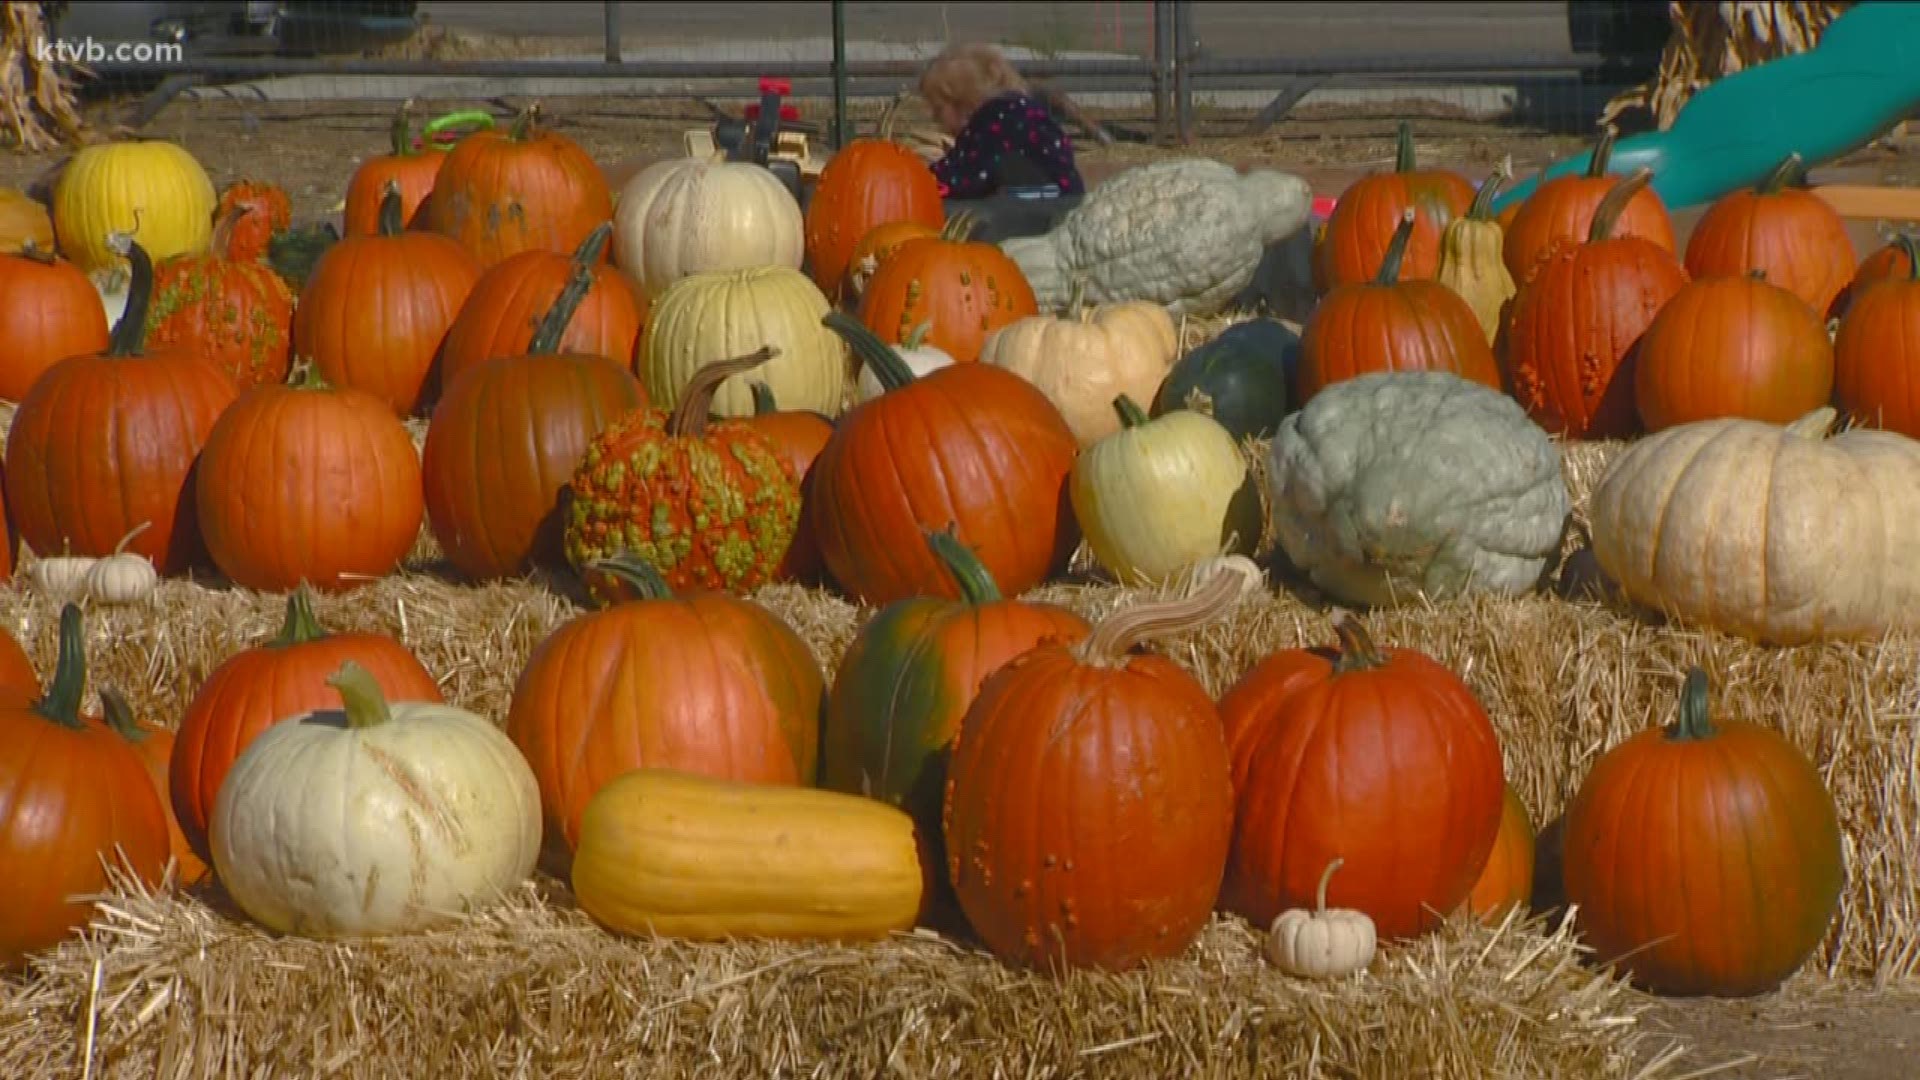 Jim Duthie takes us to place where you can find wide assortment of pumpkins.